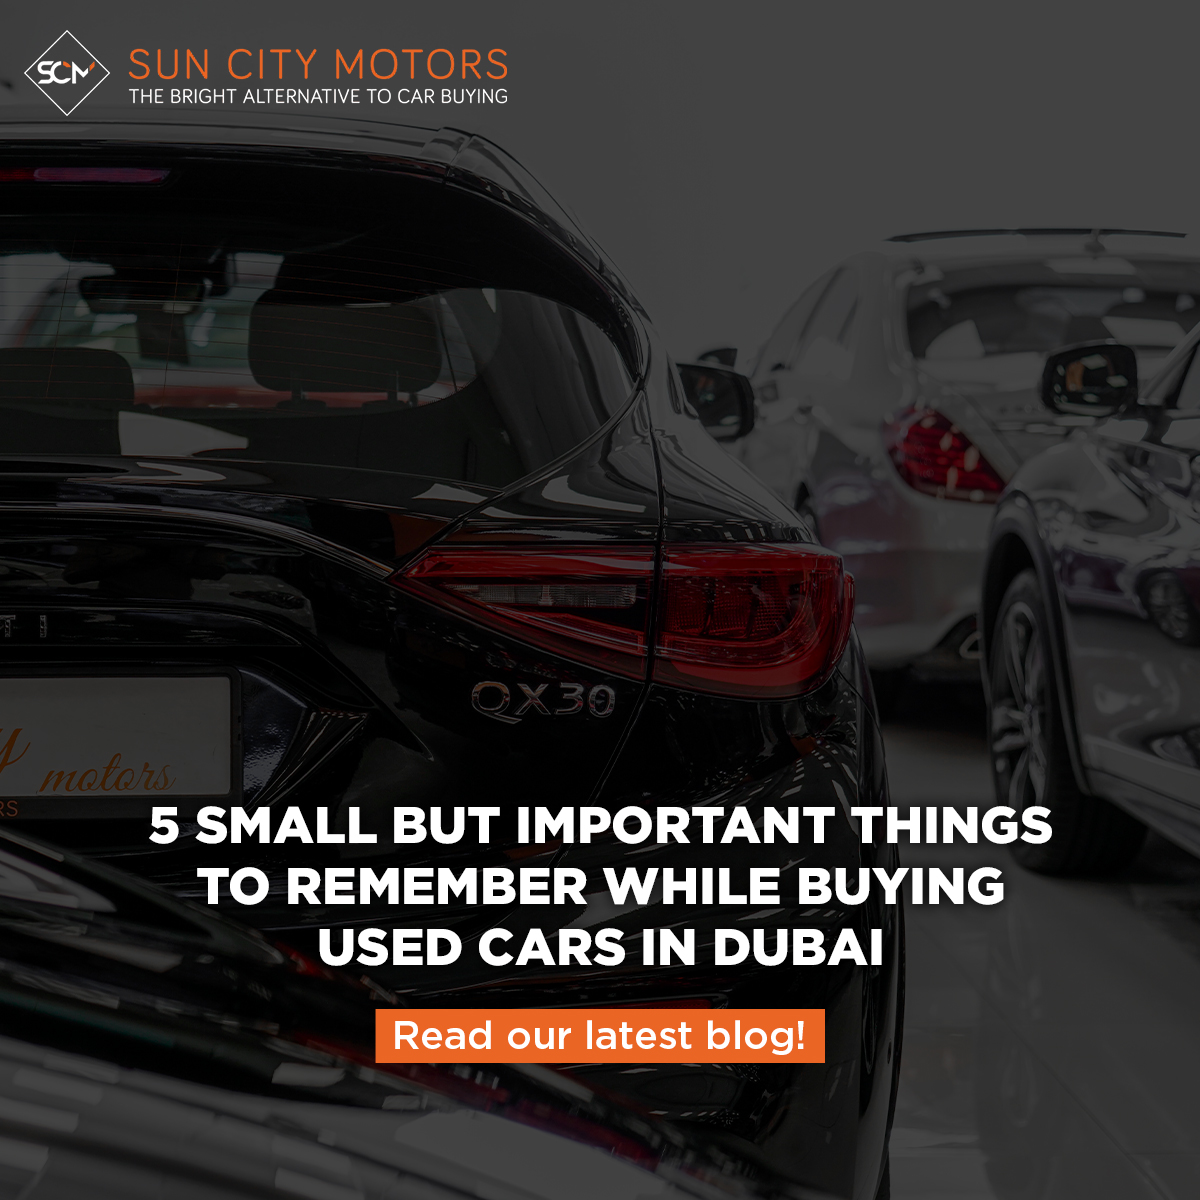 5 Small but Important Things to Remember While Buying Used Cars in Dubai